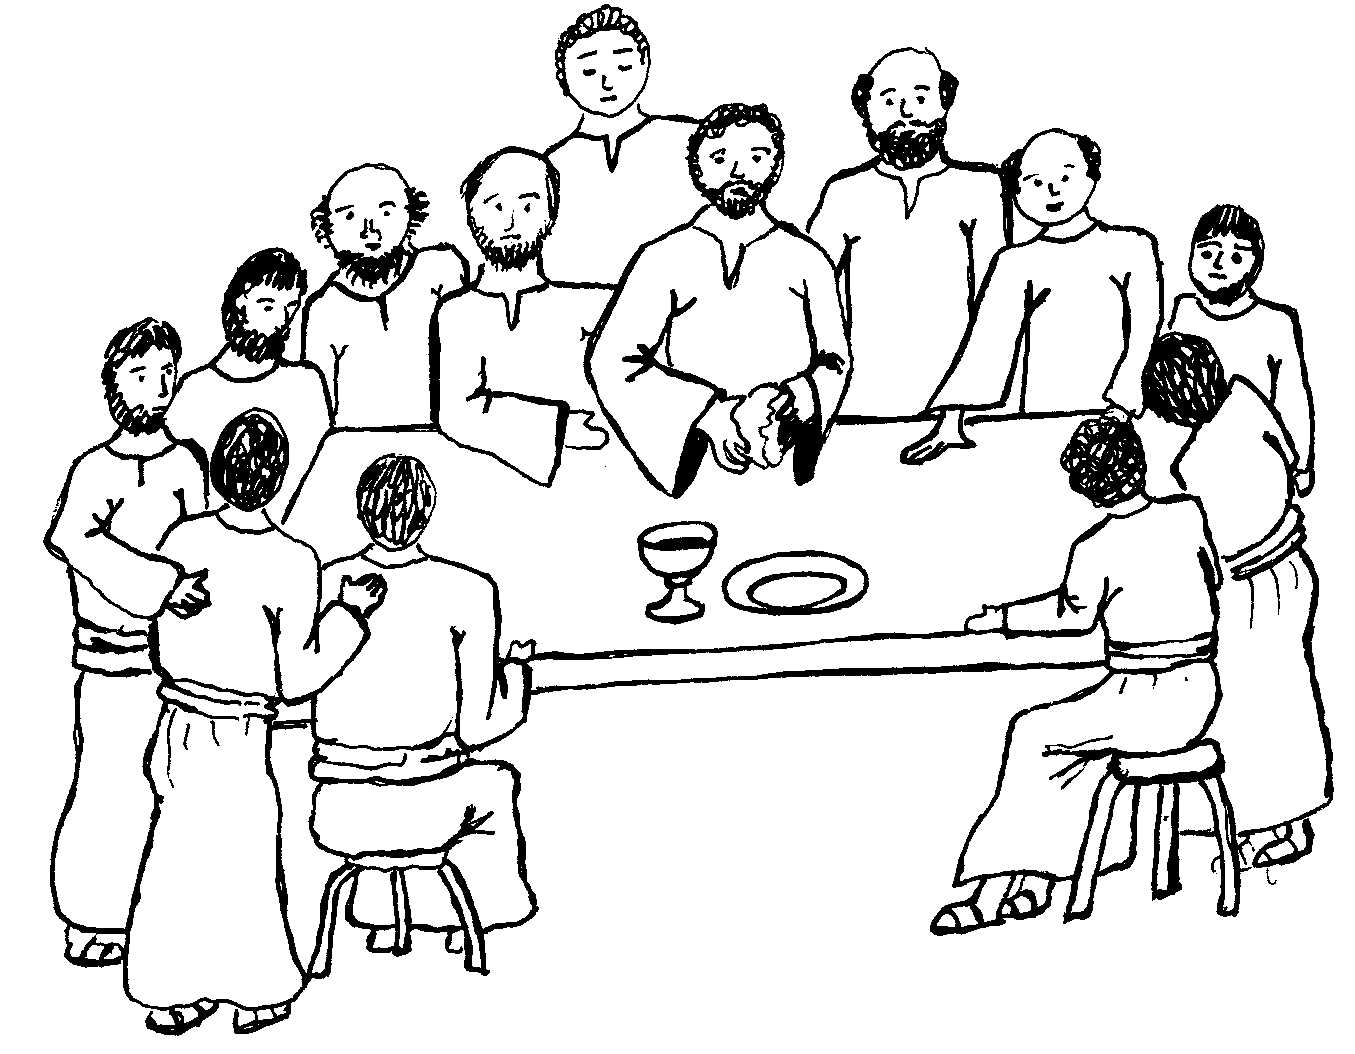 Clip Arts Related To : jesus last supper clipart. 